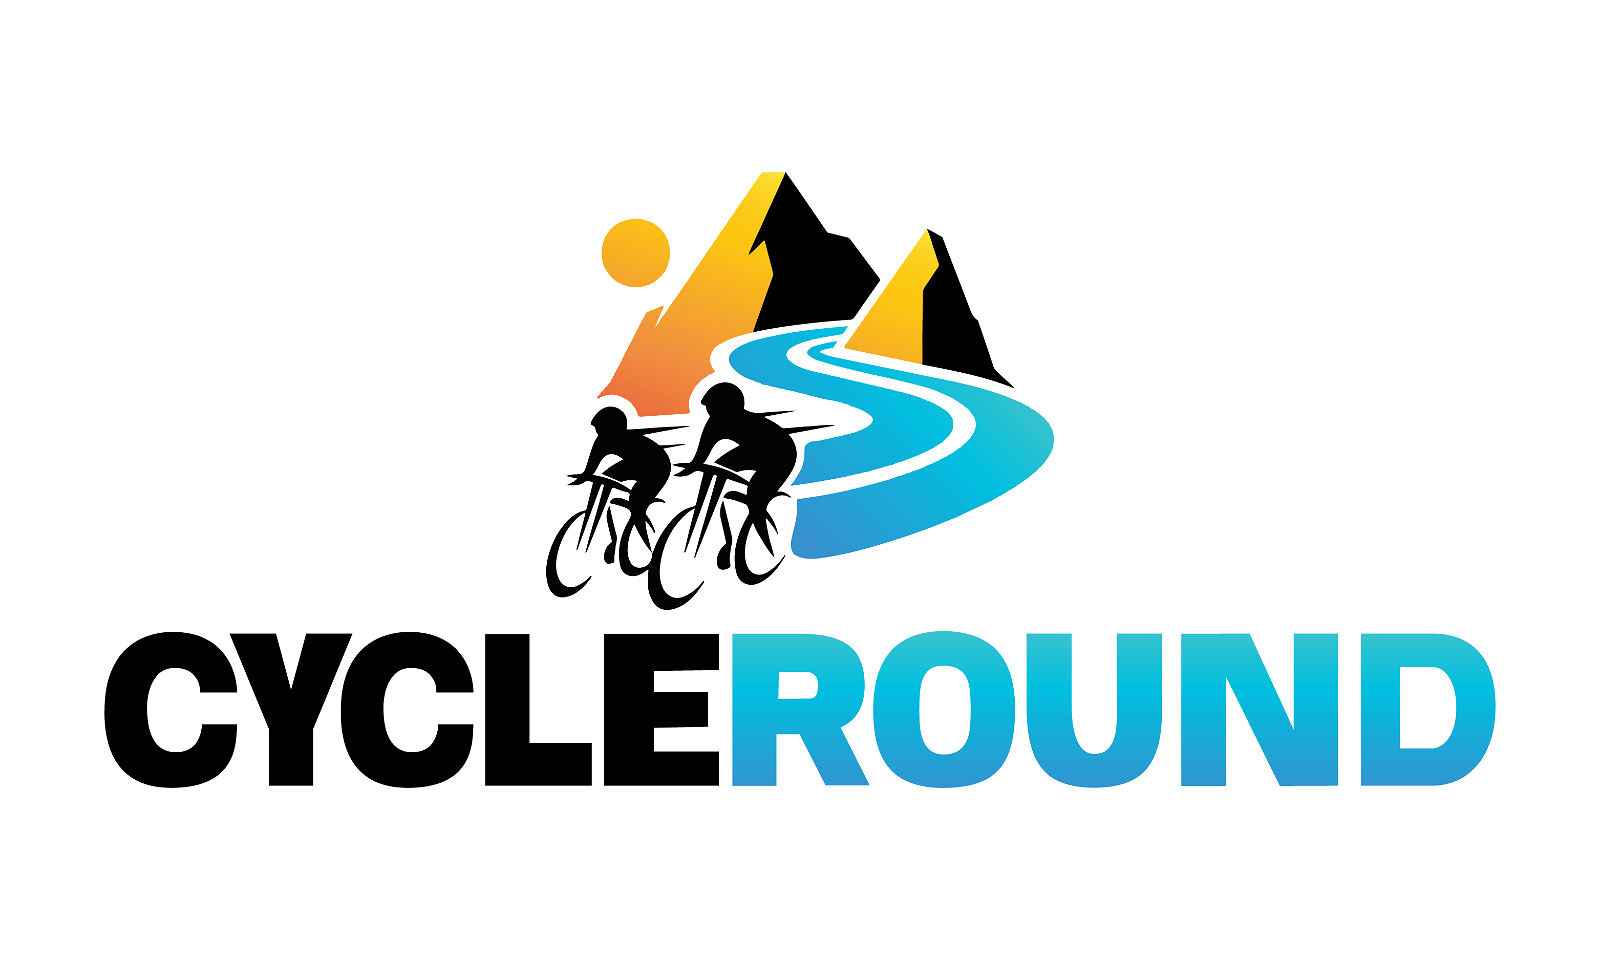 CycleRound.com - Creative brandable domain for sale